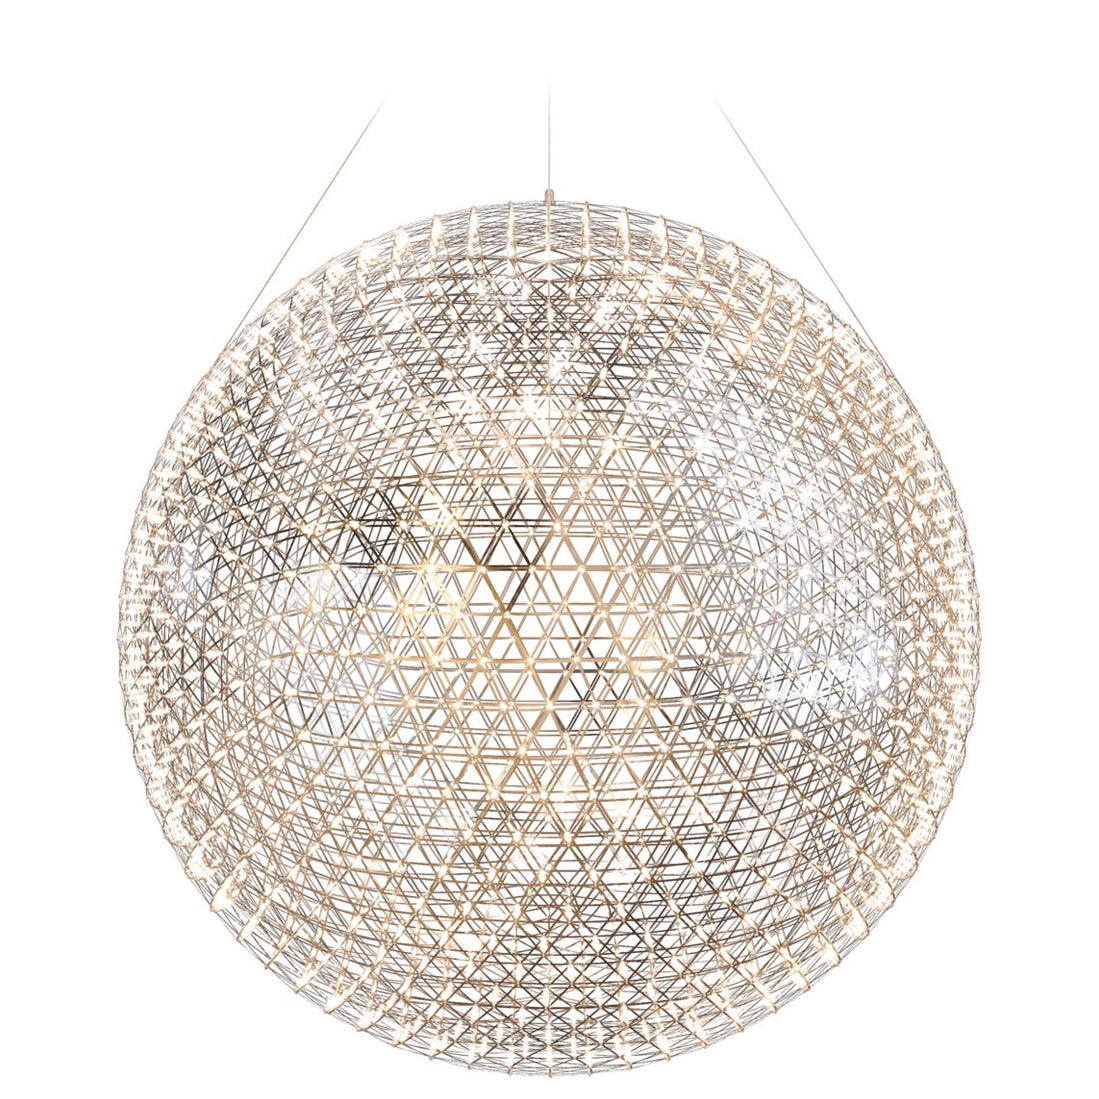 Moooi Raimond II R199 Suspension LED Lamp in Stainless Steel, 10m For Sale